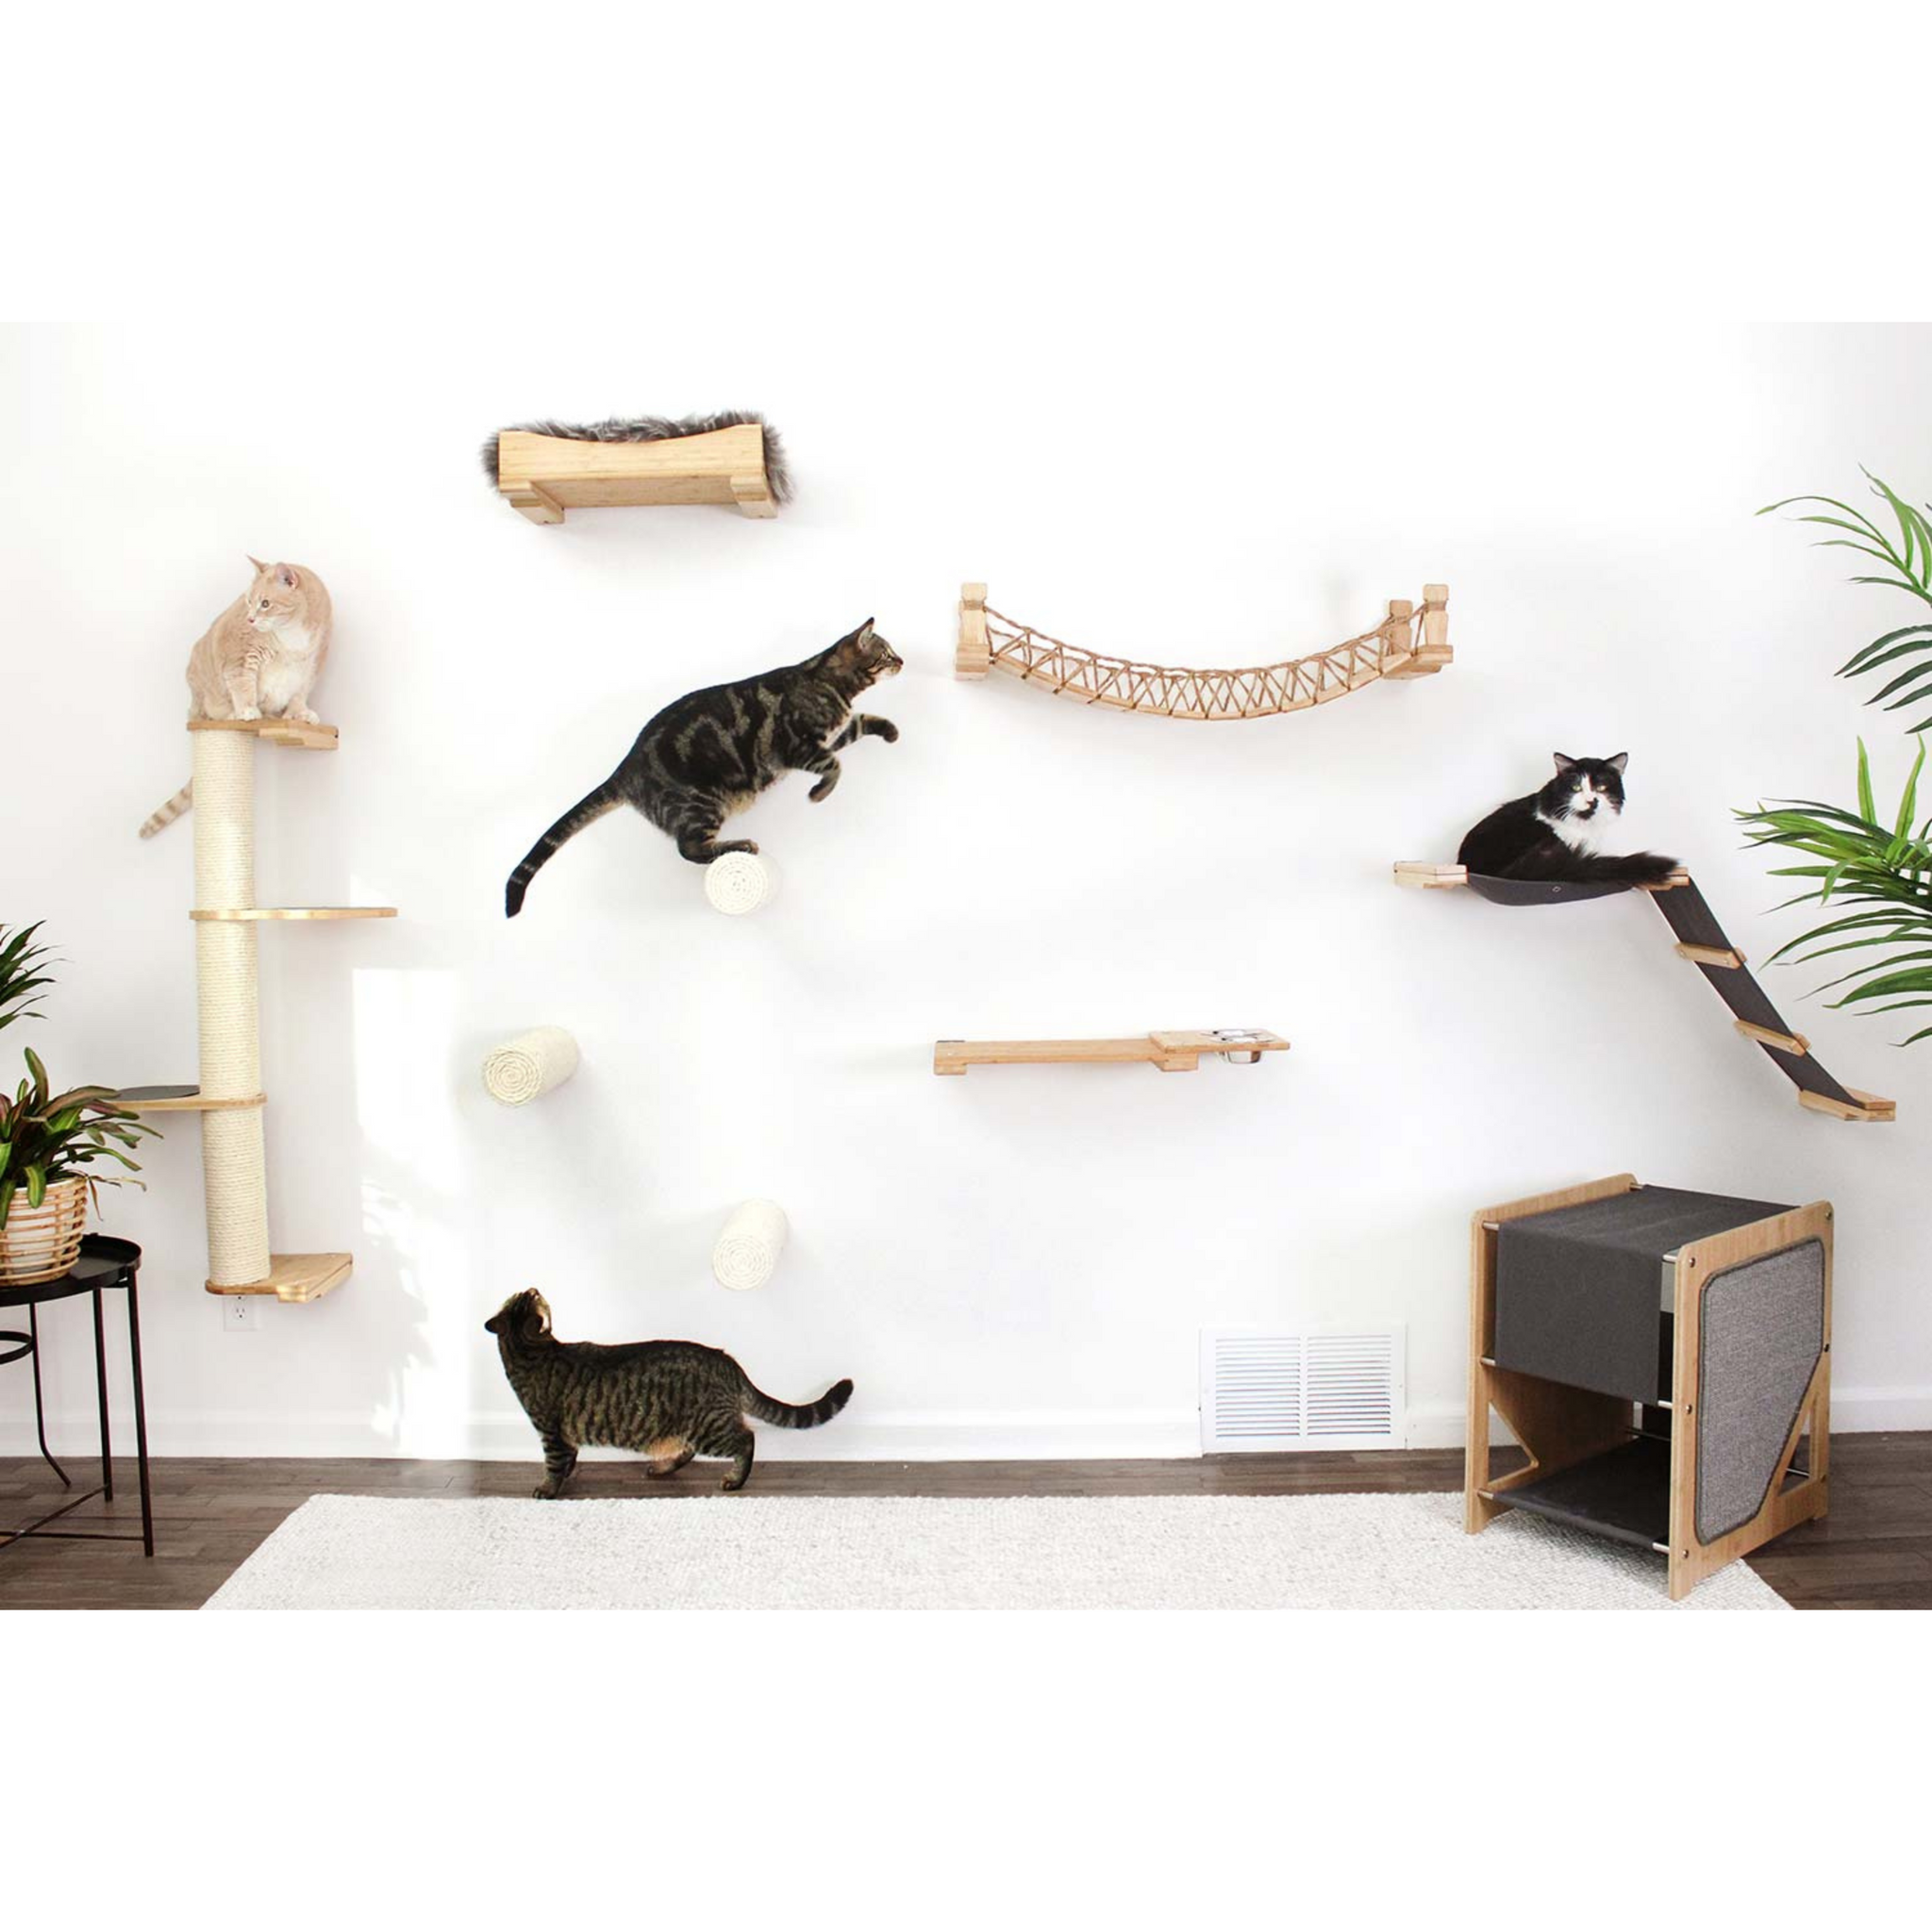 Cat Suspension Bridge - Cat Shelf Set (Wall Mounted) by Catastrophic Creations